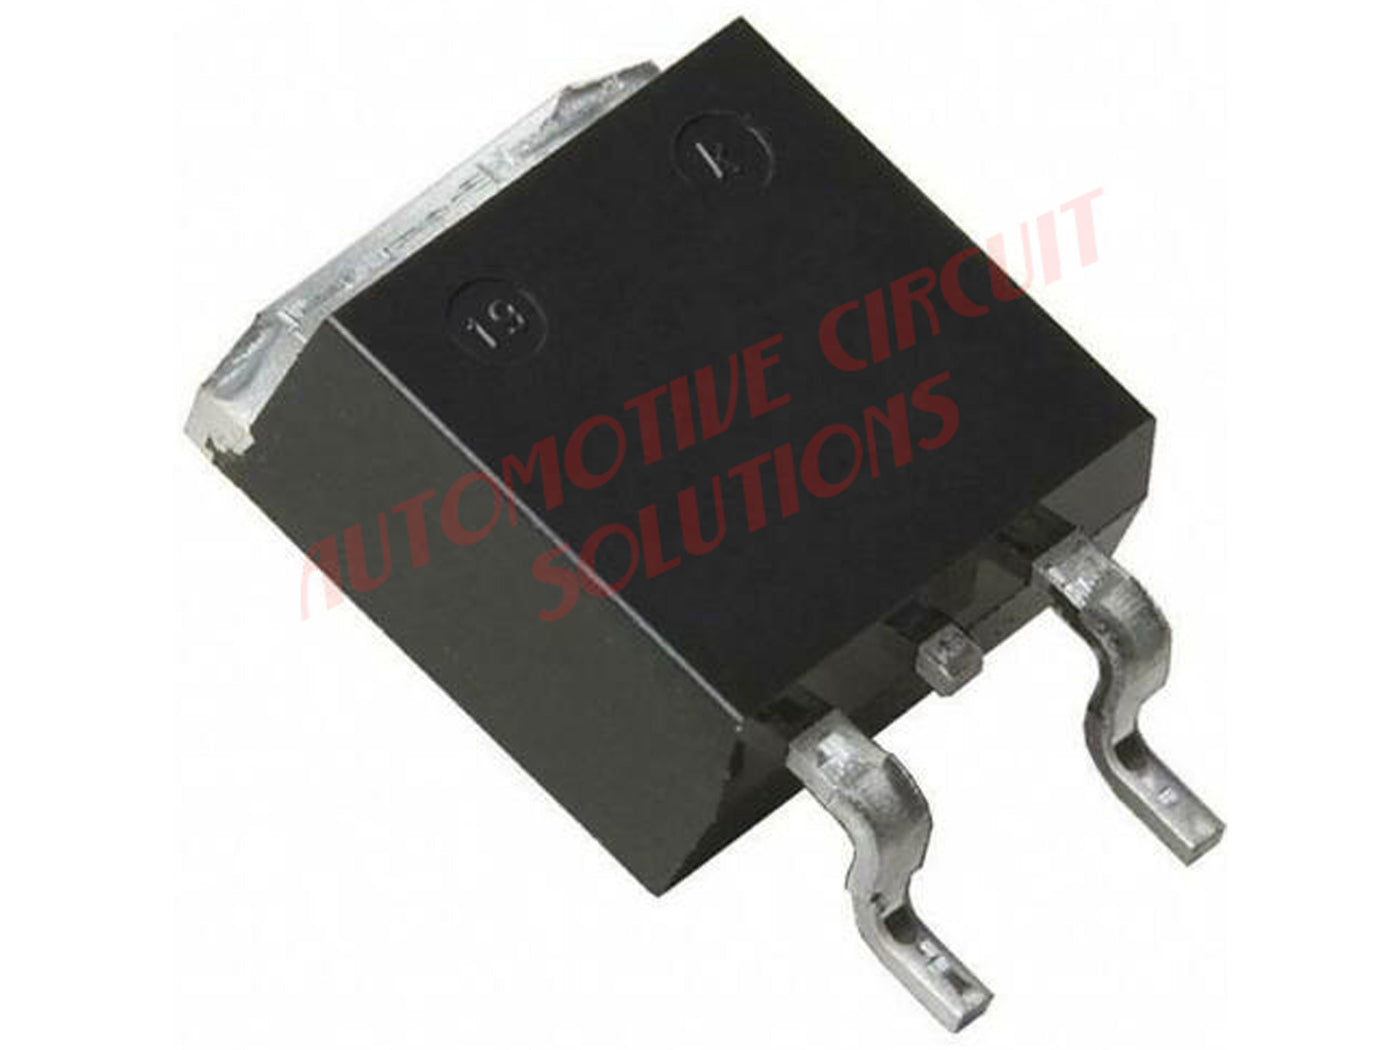 BMW N54 DME MSD80 E90 E92 E82 N54 335i 135i MOSFET FDB 14N30 Automotive Circuit Solutions 